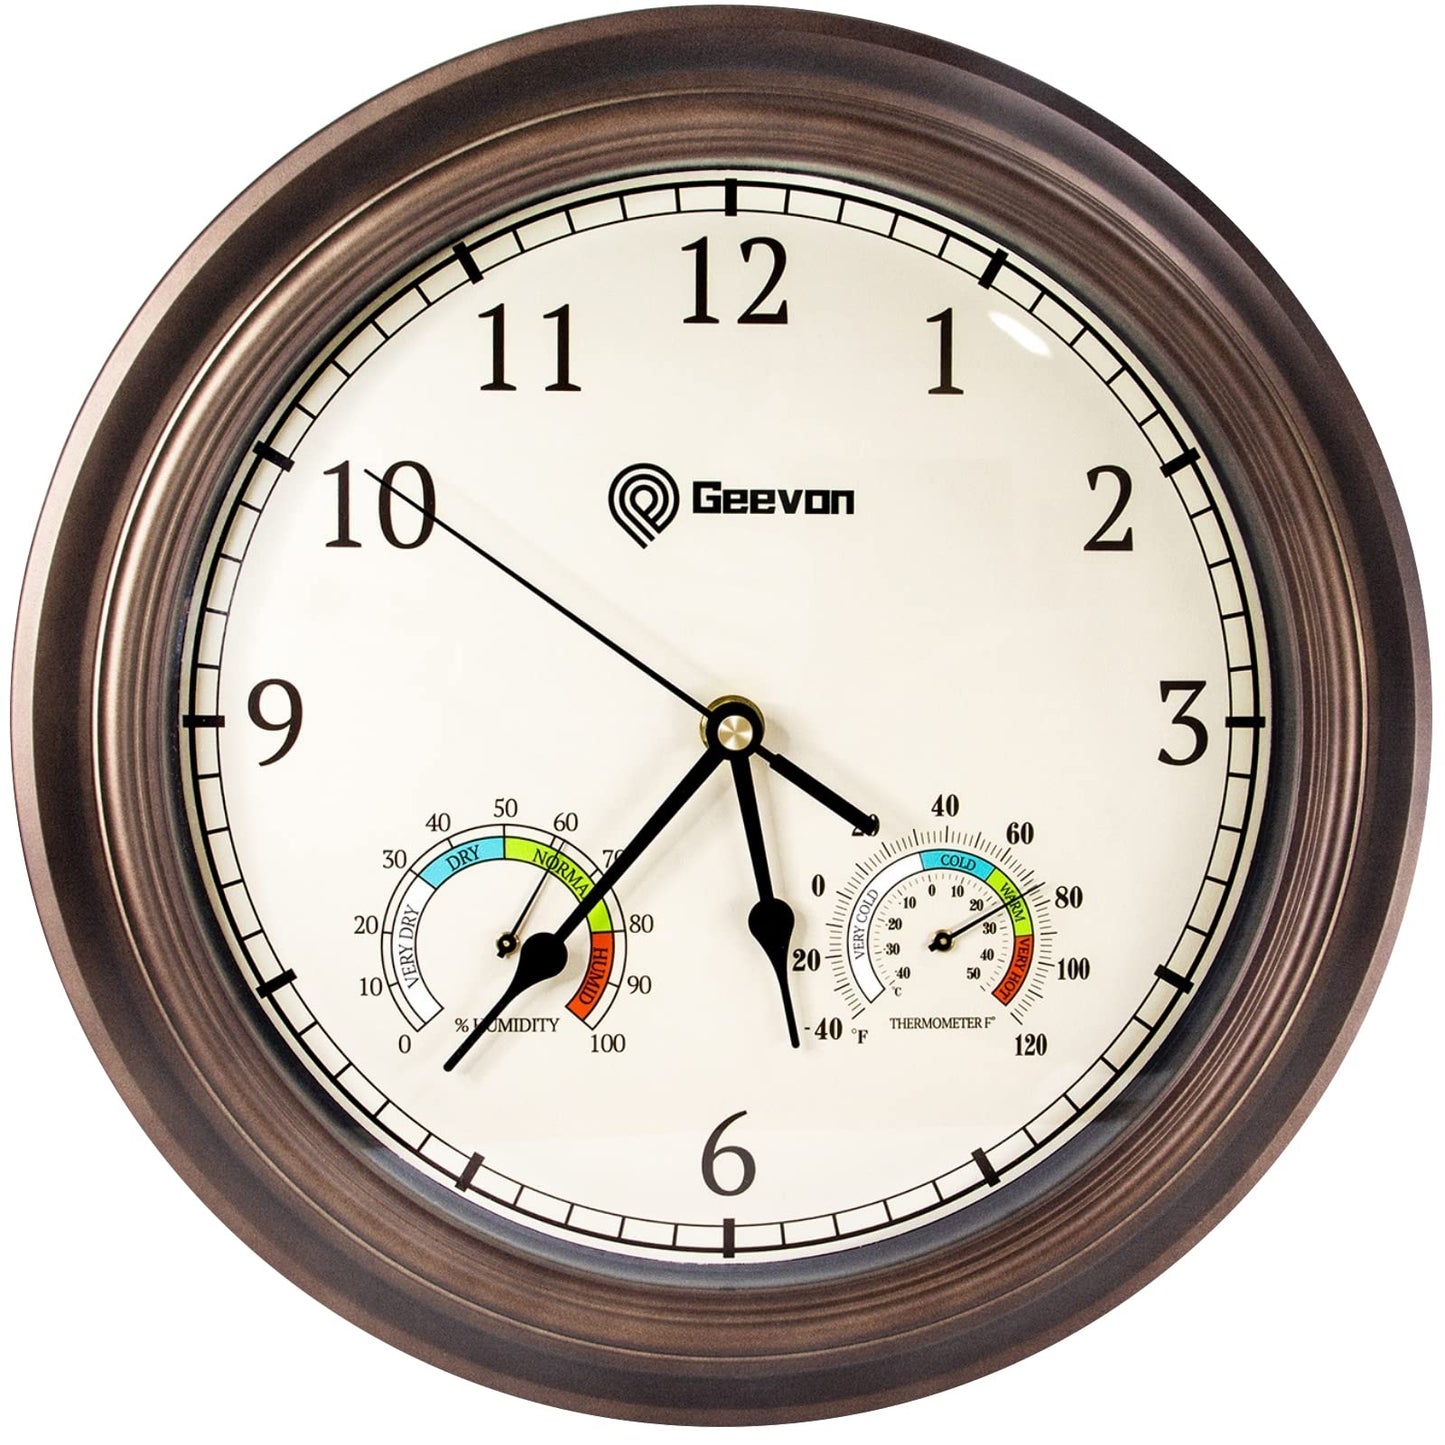 GEEVON Wall Clock Non Ticking 12 in with Hygrometer and Thermometer Combo,Battery Operated Quartz Decorative Large Digital Wall Clocks for Home,Living Room,Office,Classroom,Kitchen,Bedroom Decor